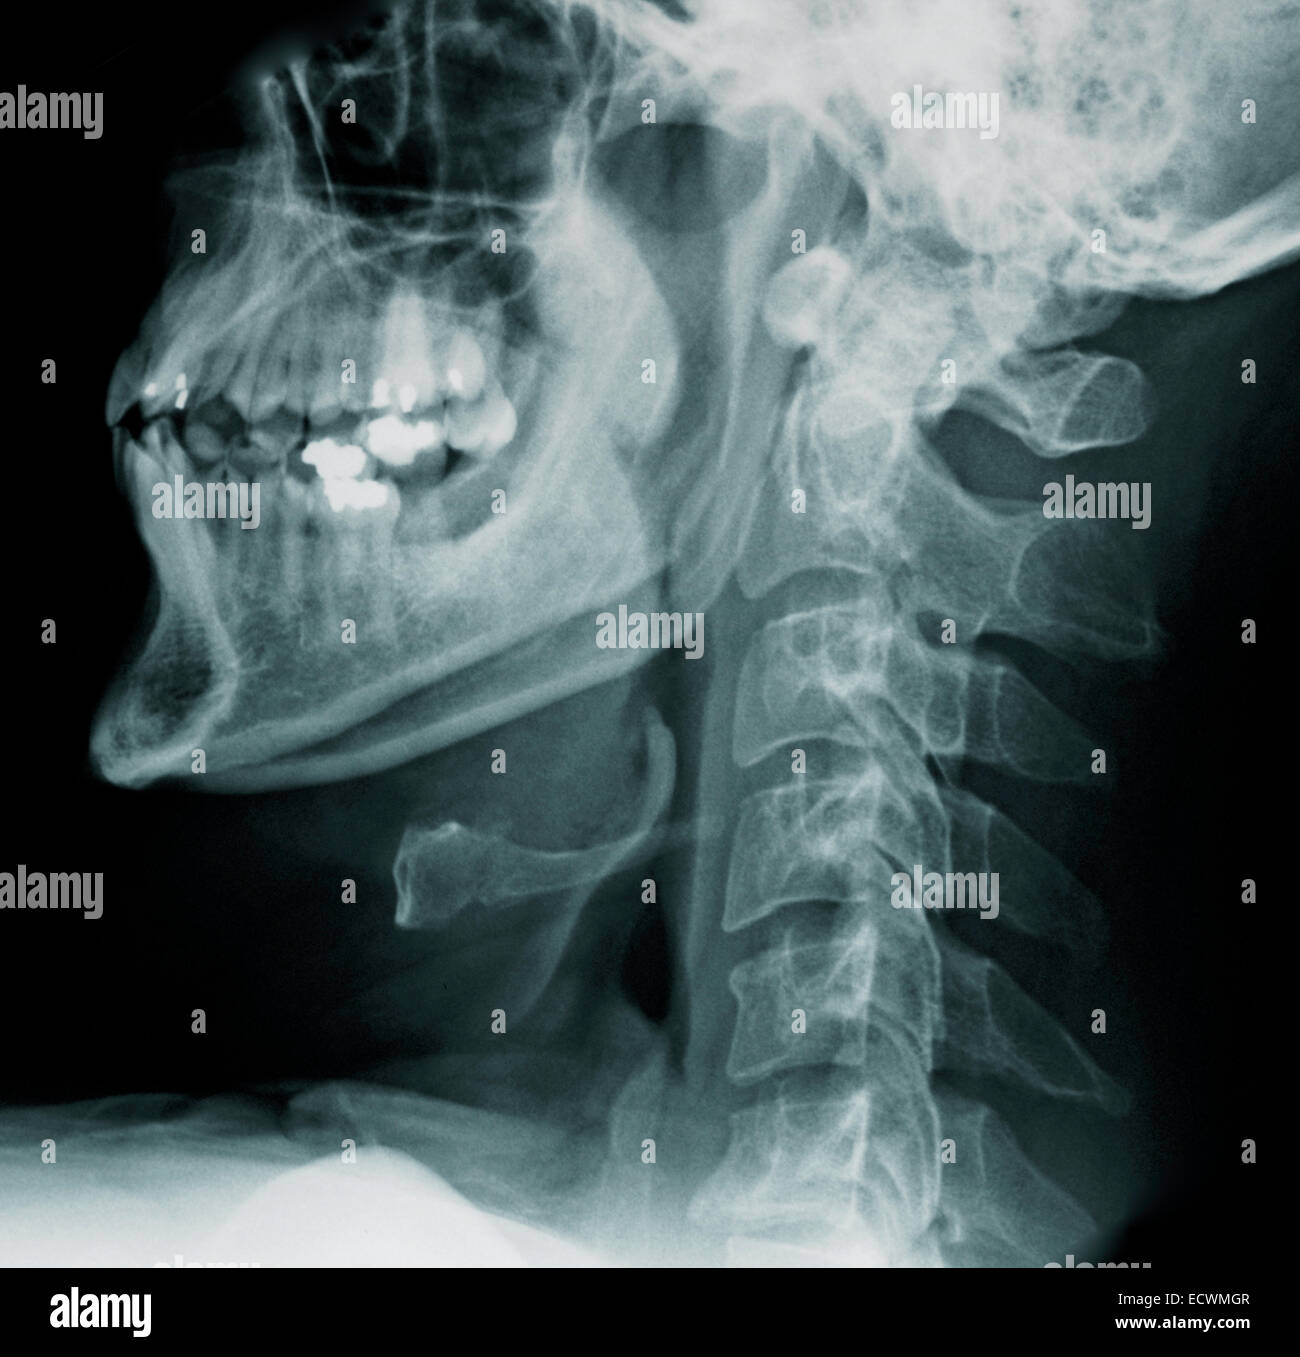 cervical spine x ray views